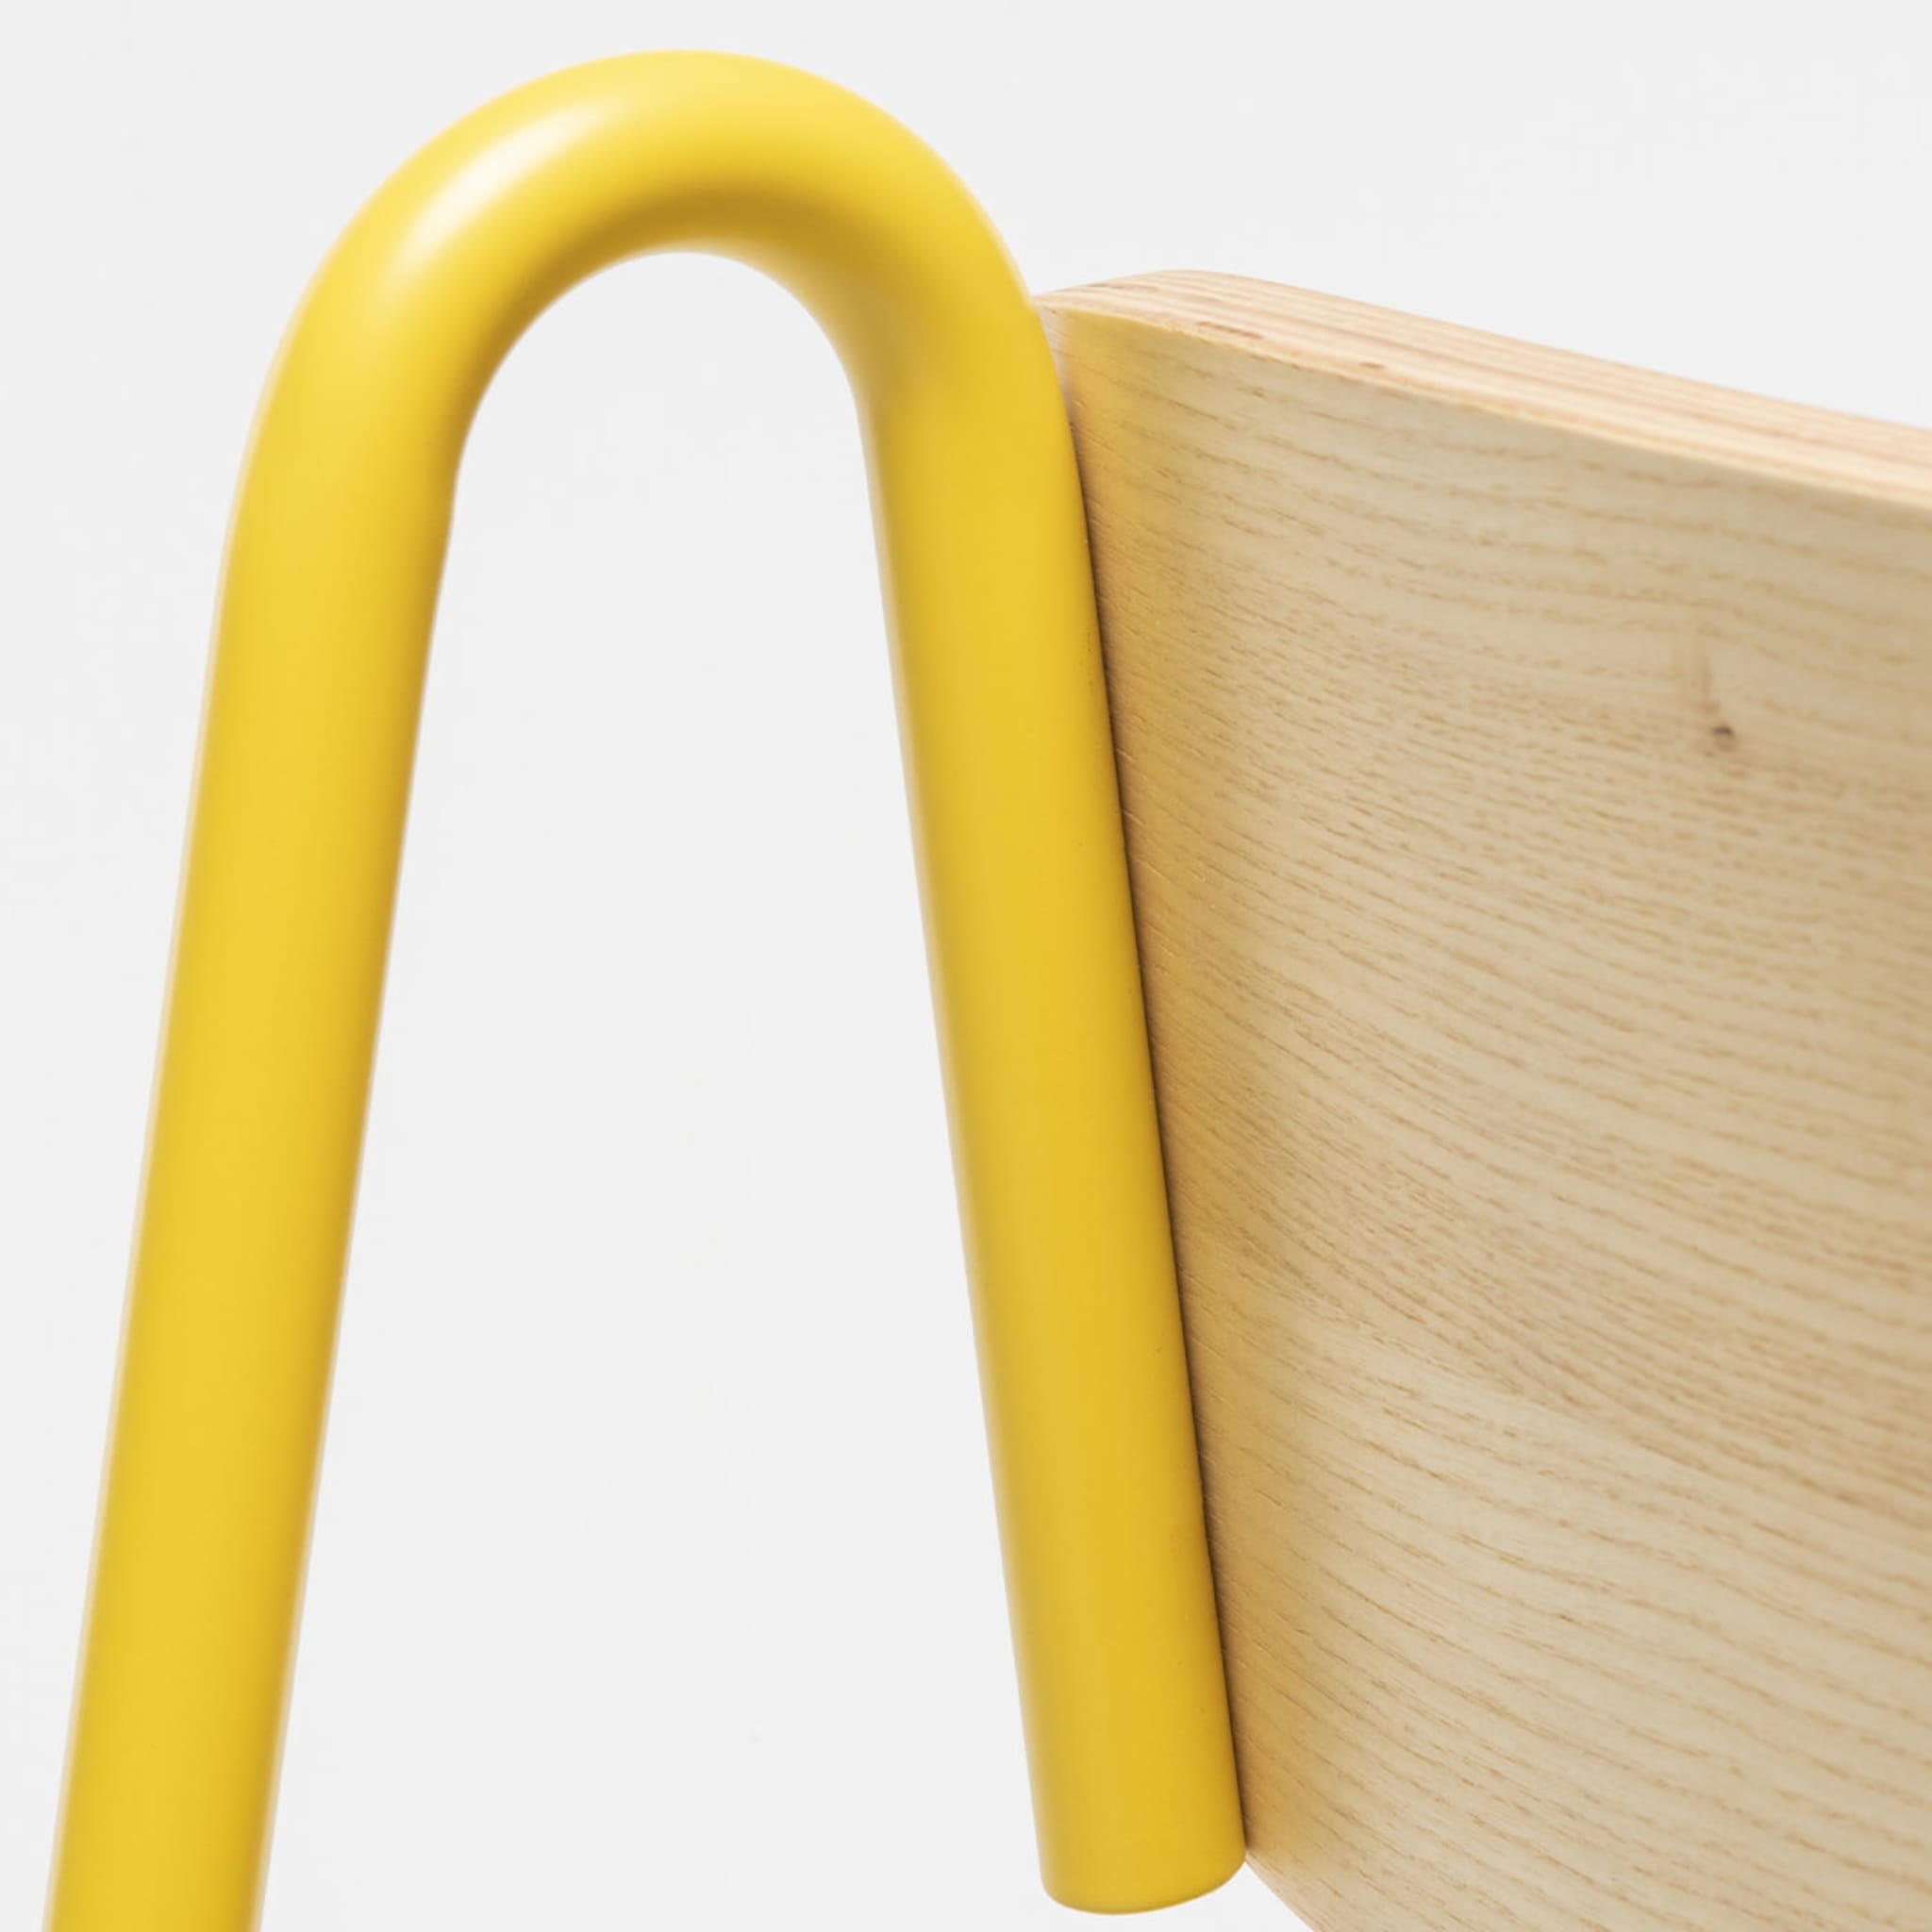 Lena S Yellow And Natural Ash Chair By Designerd - Alternative view 2